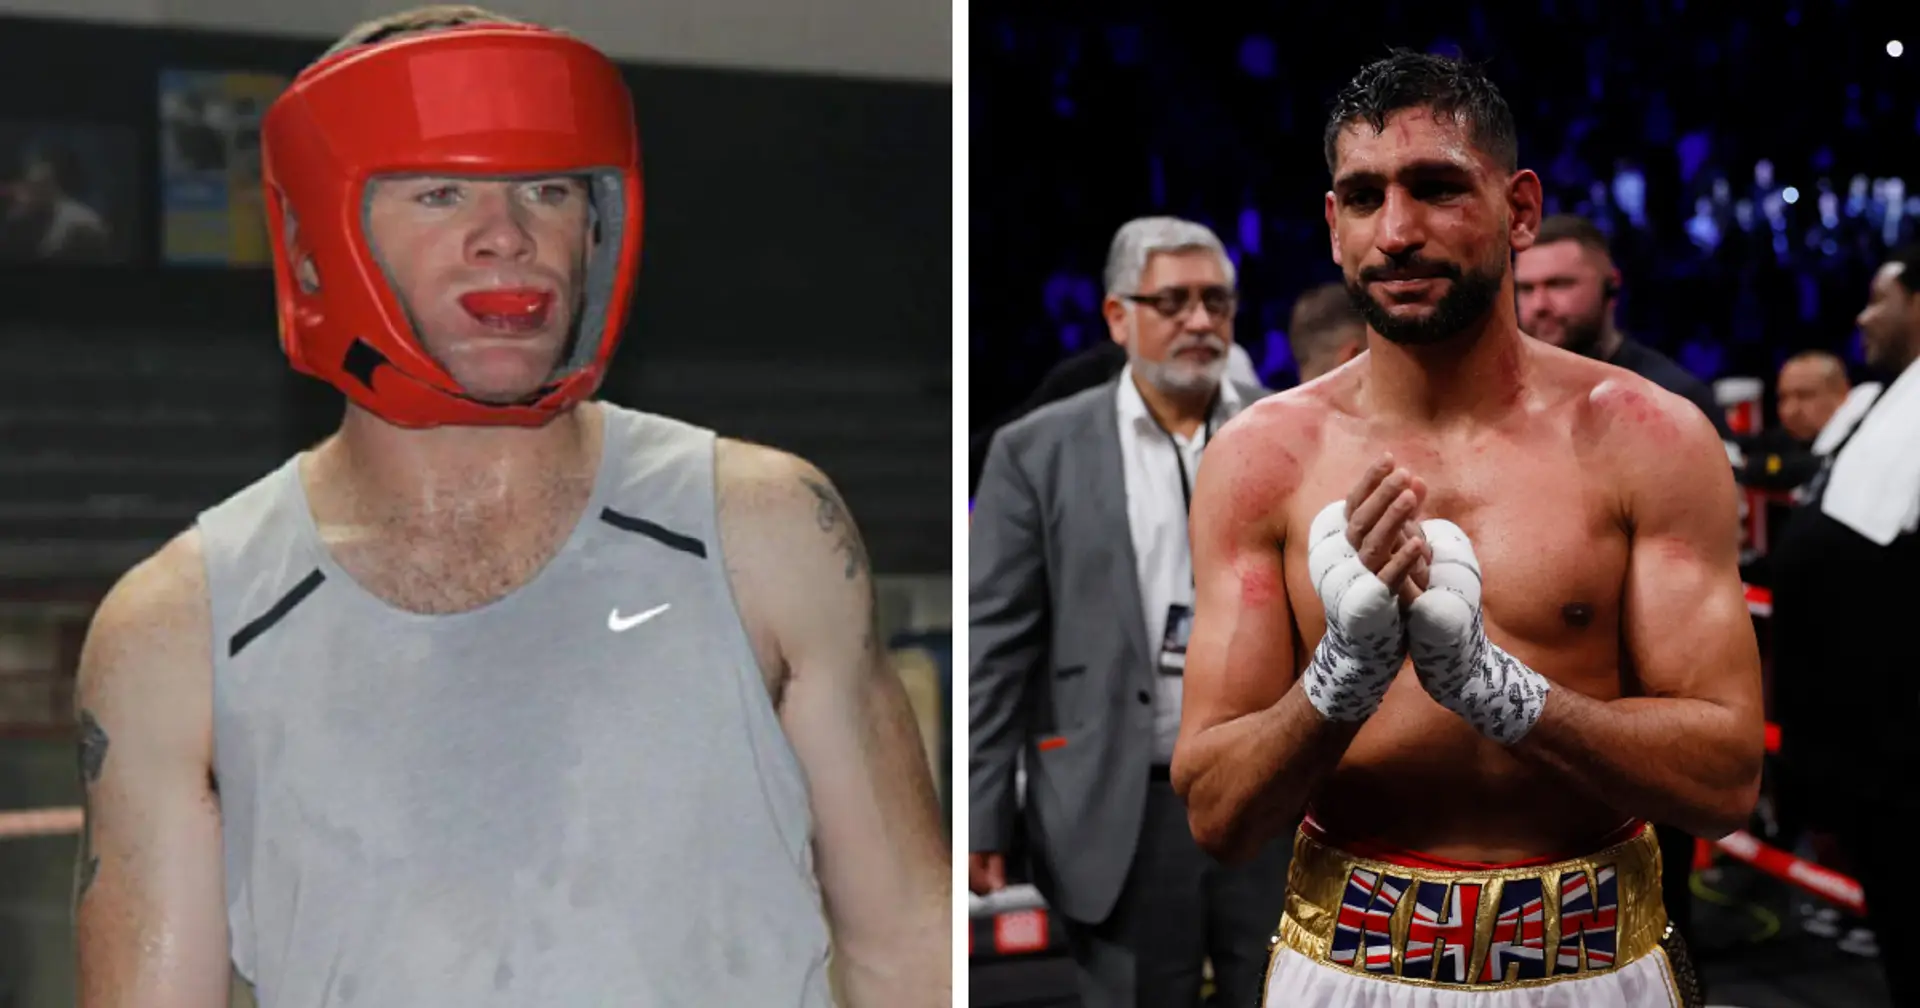 'It would sell well': Amir Khan offers to train Wayne Rooney for a boxing fight that can settle an old beef 